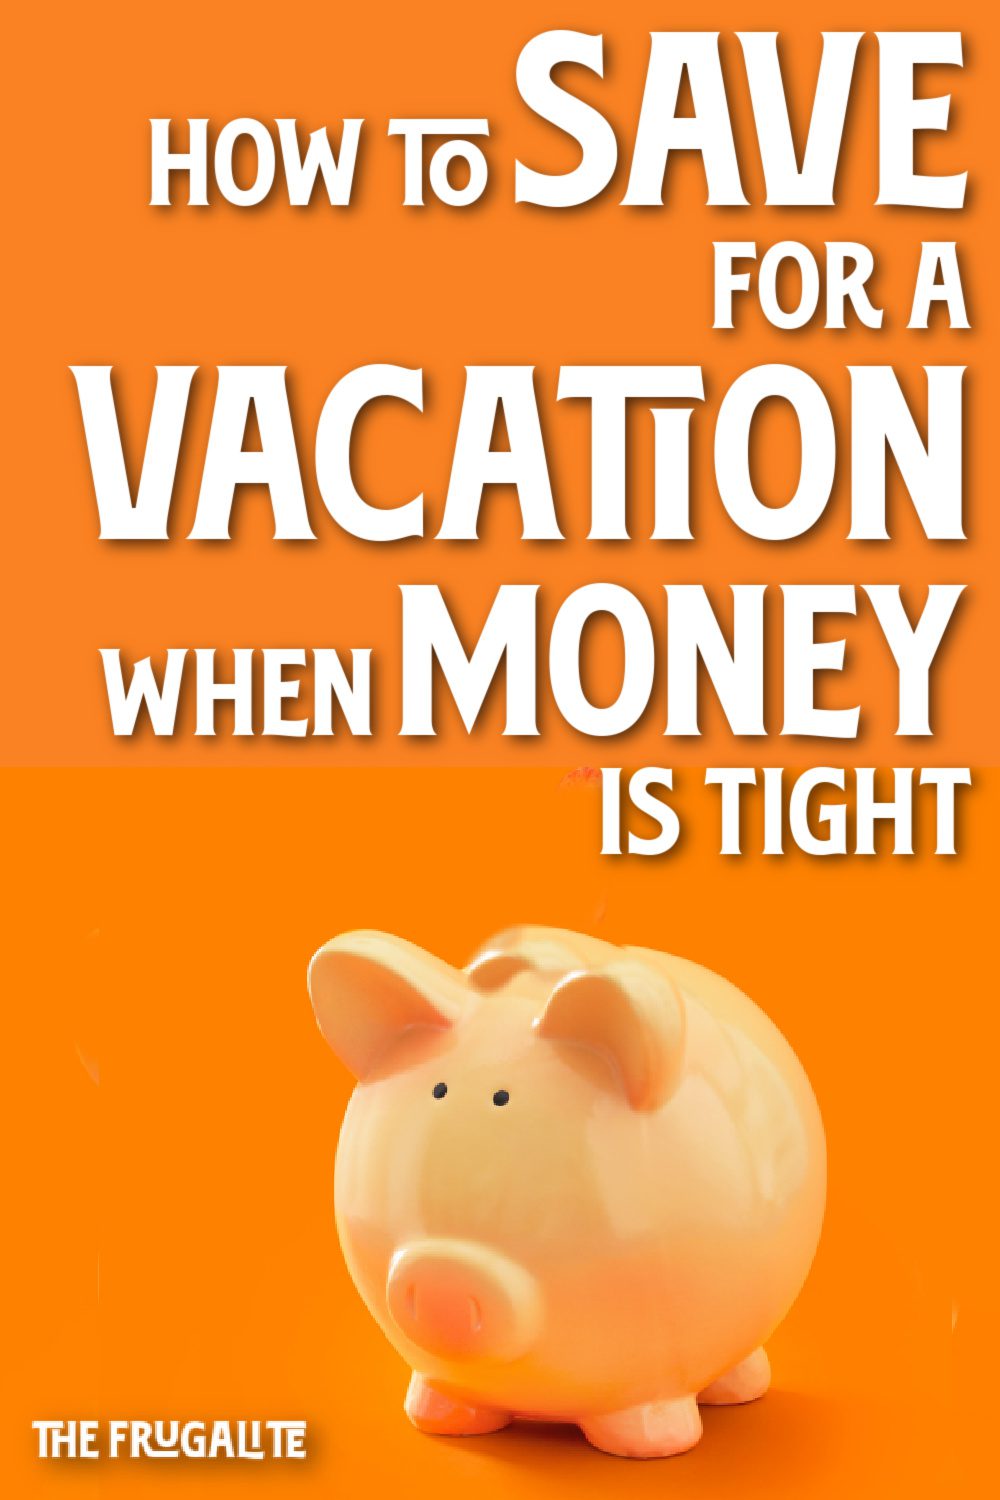 How to Save for a Vacation When Money Is Tight